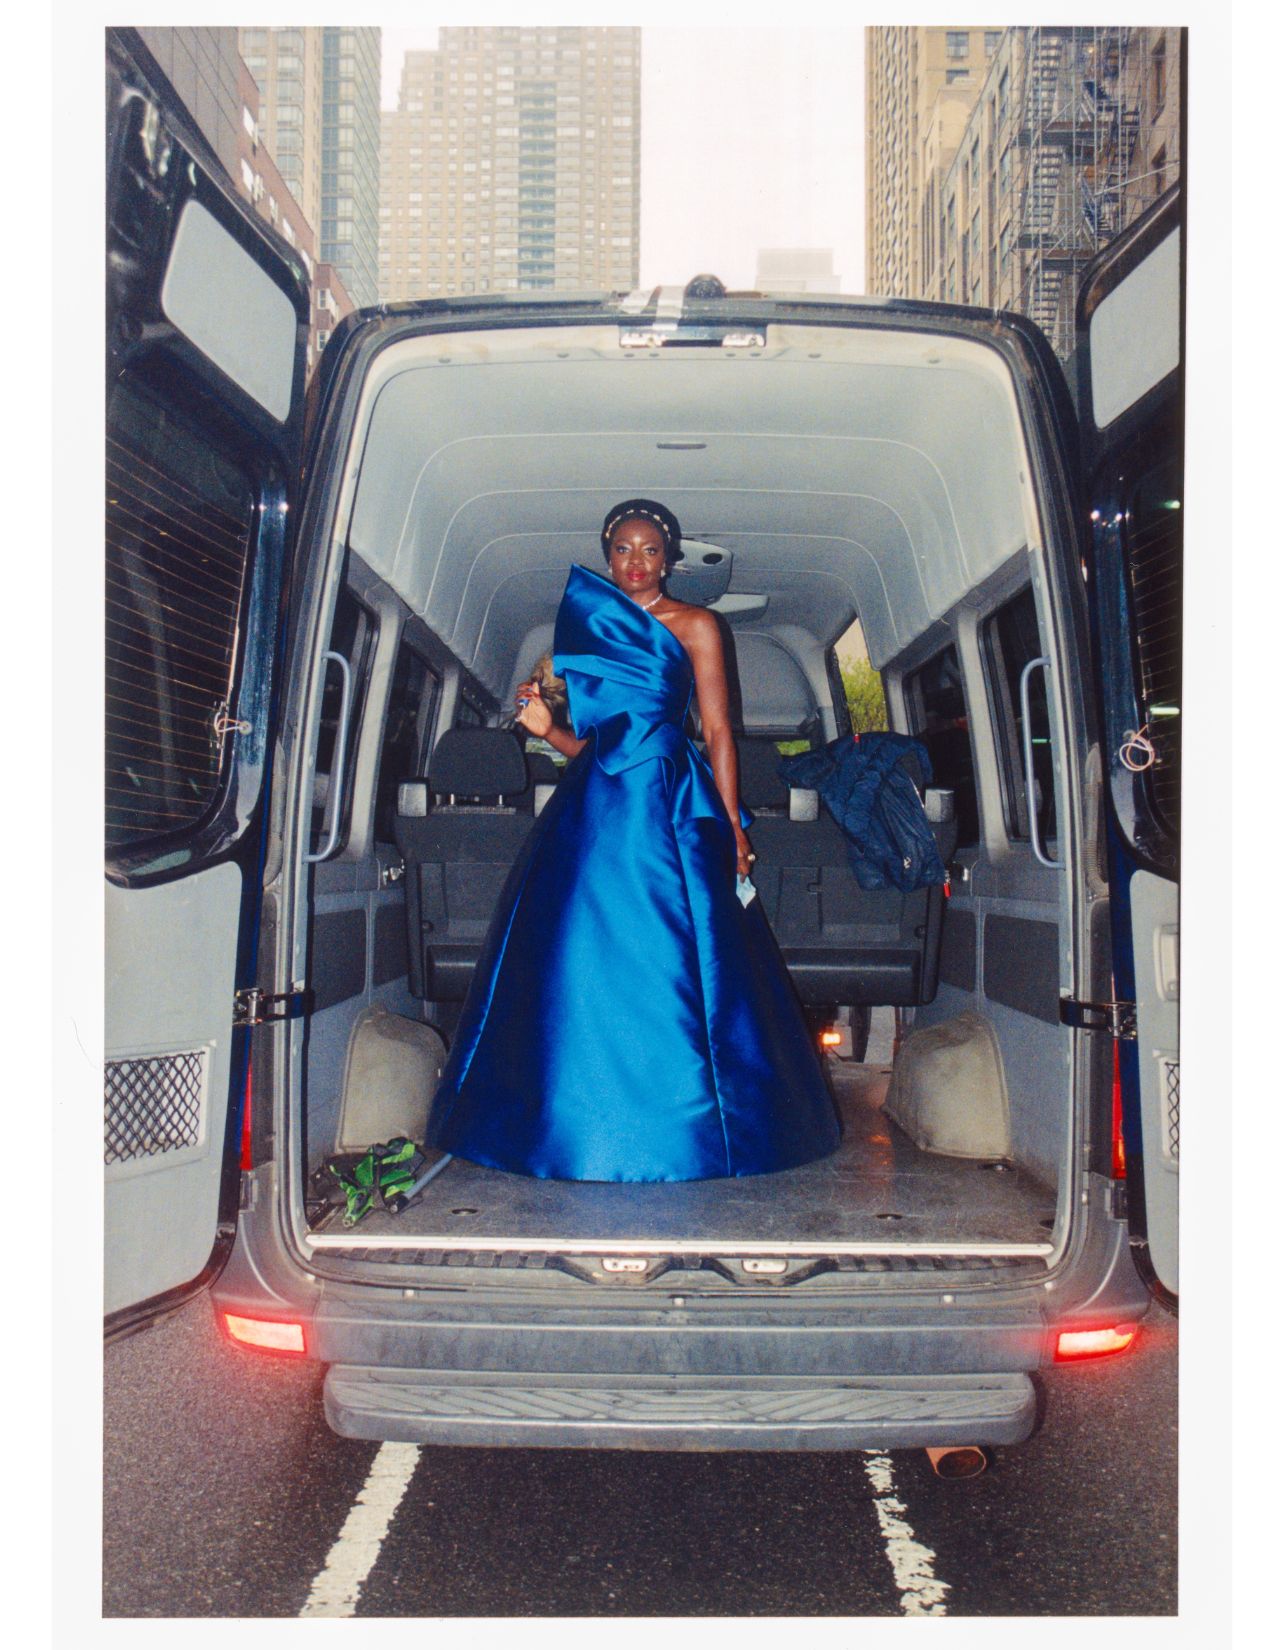 Danai in Royal blue gown at the Met Gala